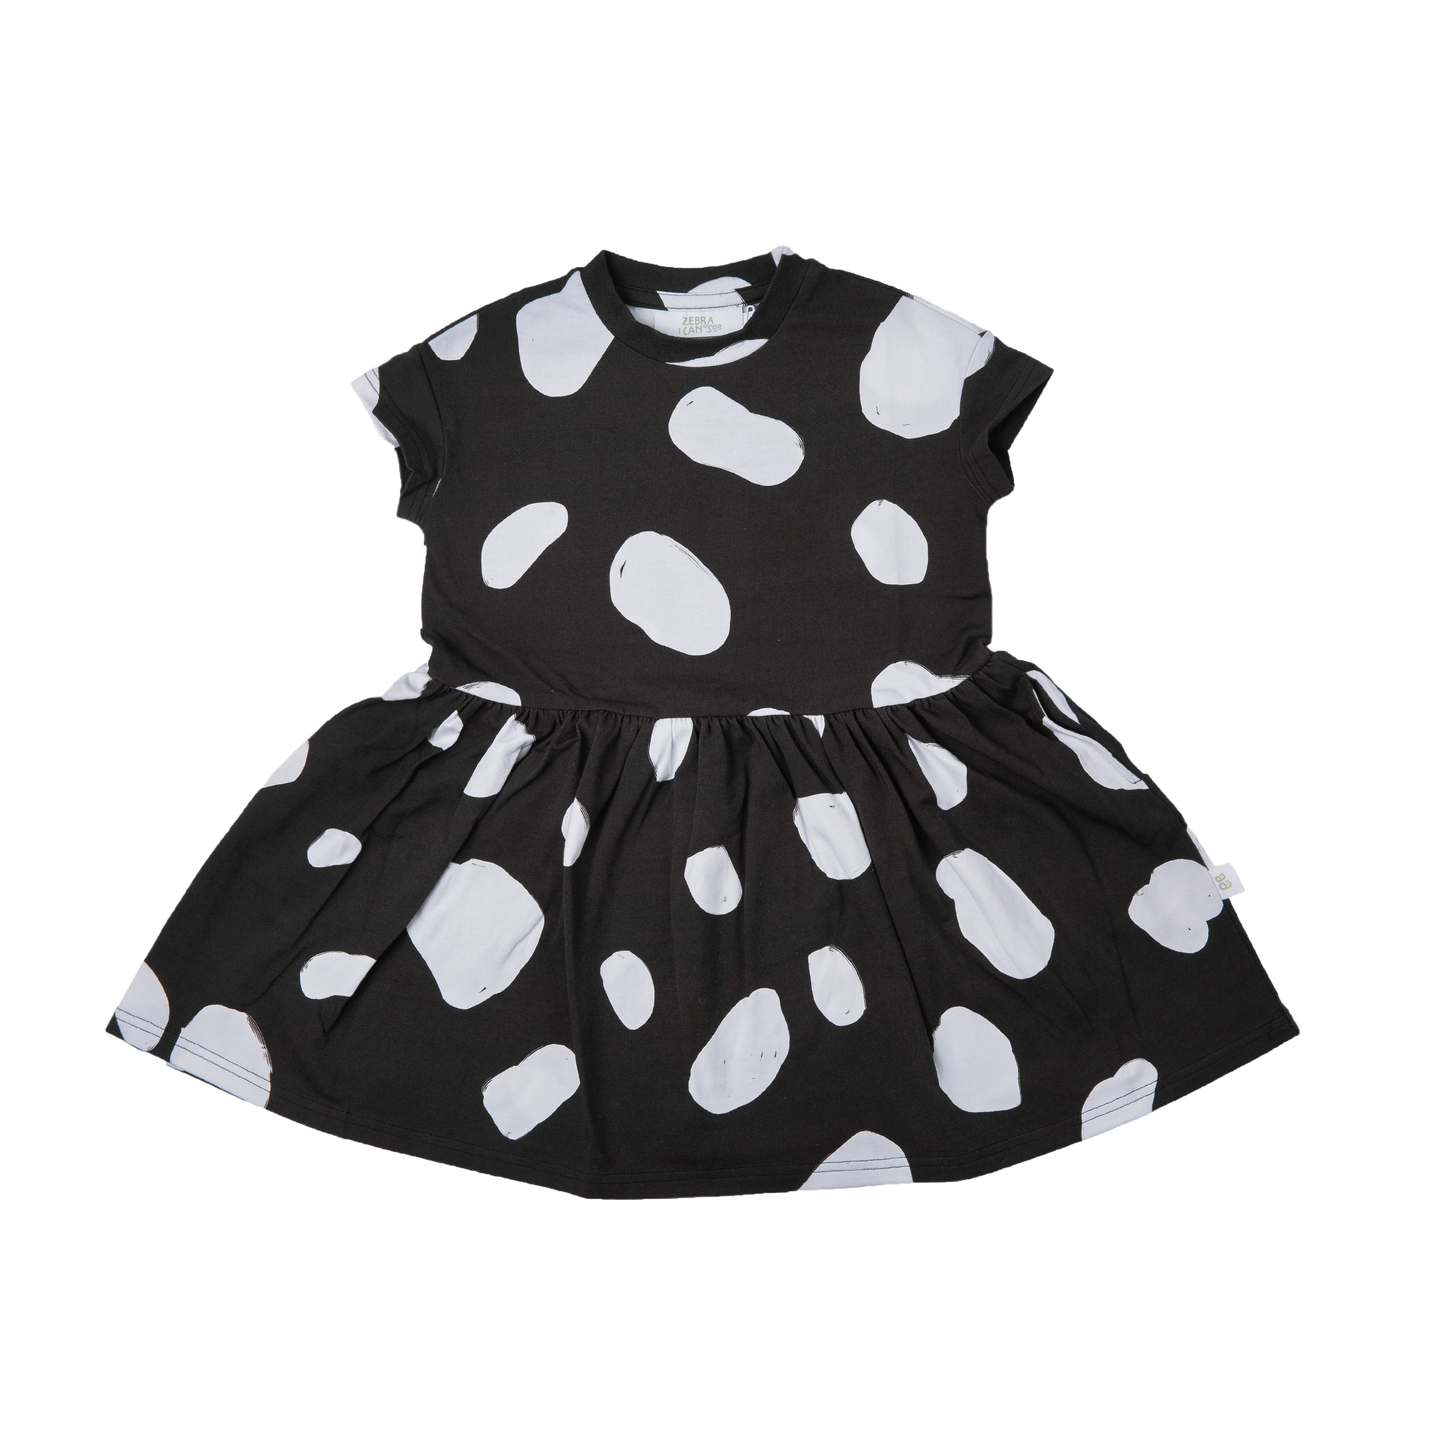 Cow Short Sleeve Dress Black and White